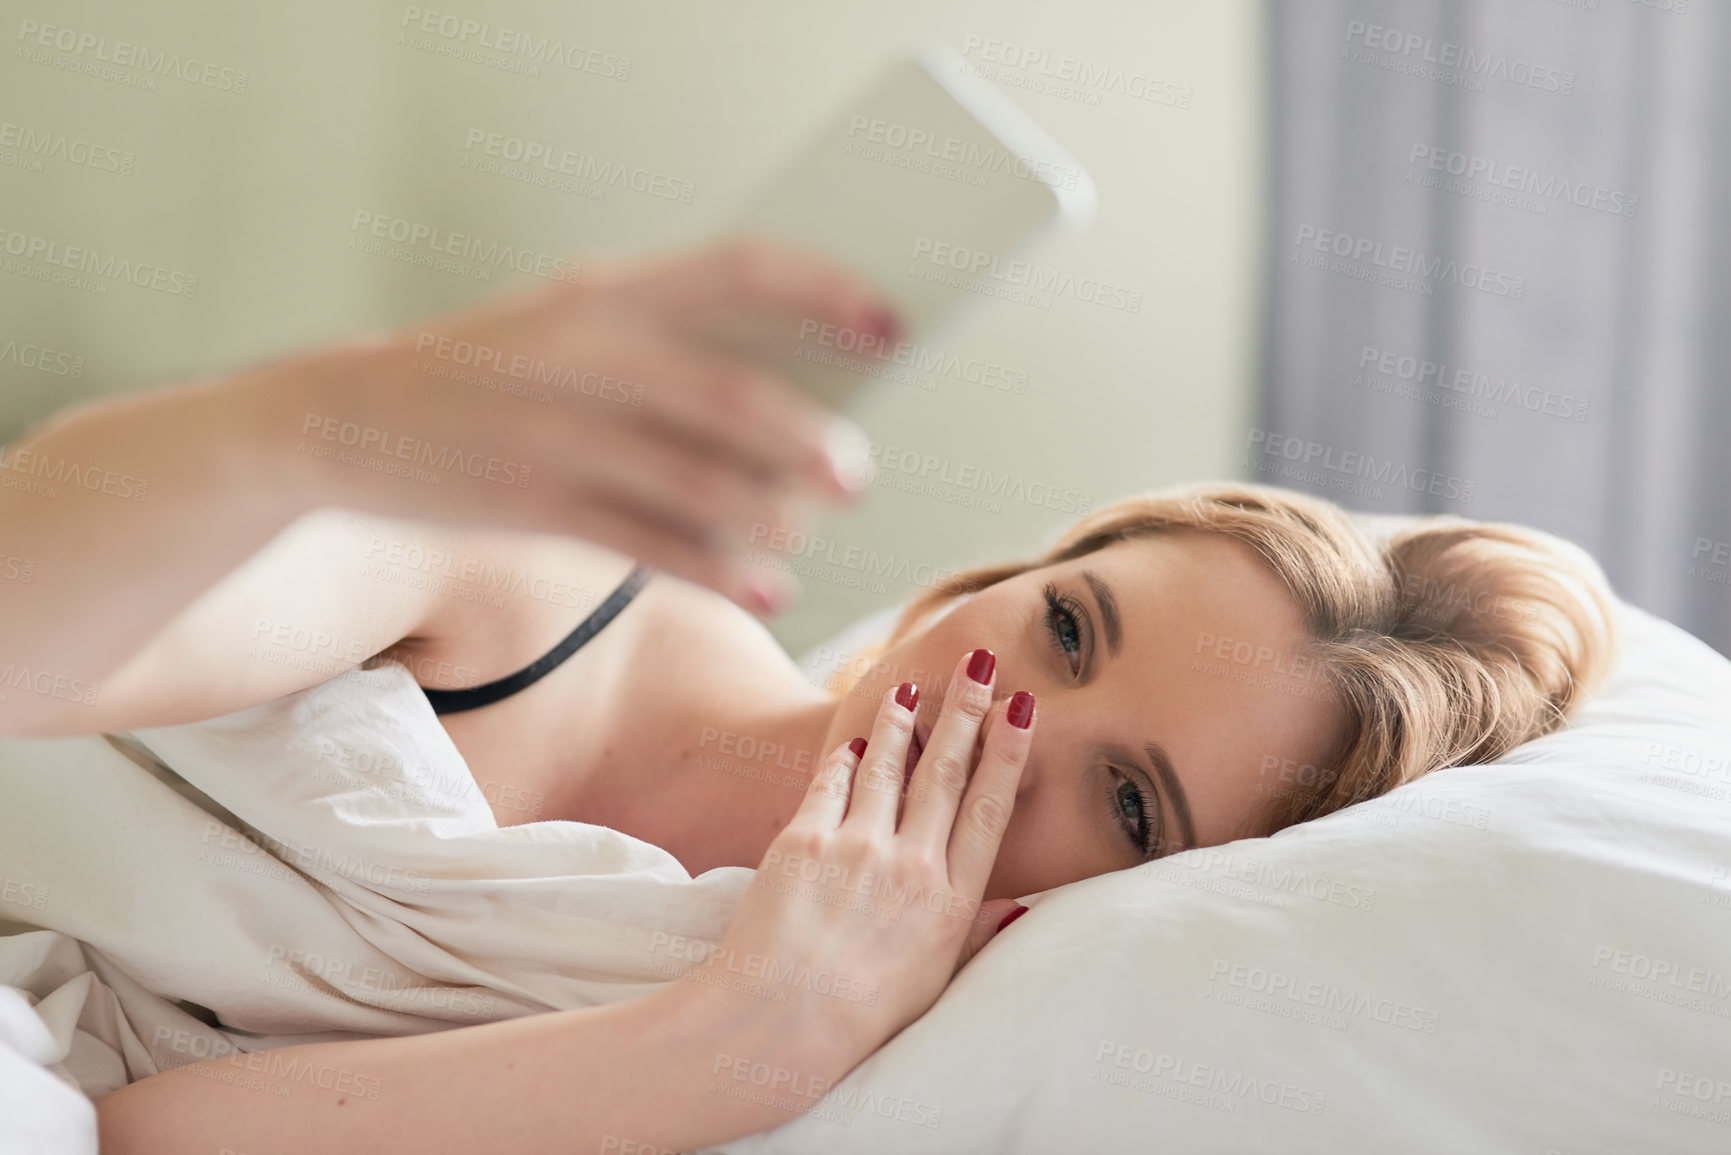 Buy stock photo Shot of an attractive young woman texting on her cellphone while lying in her bed at home